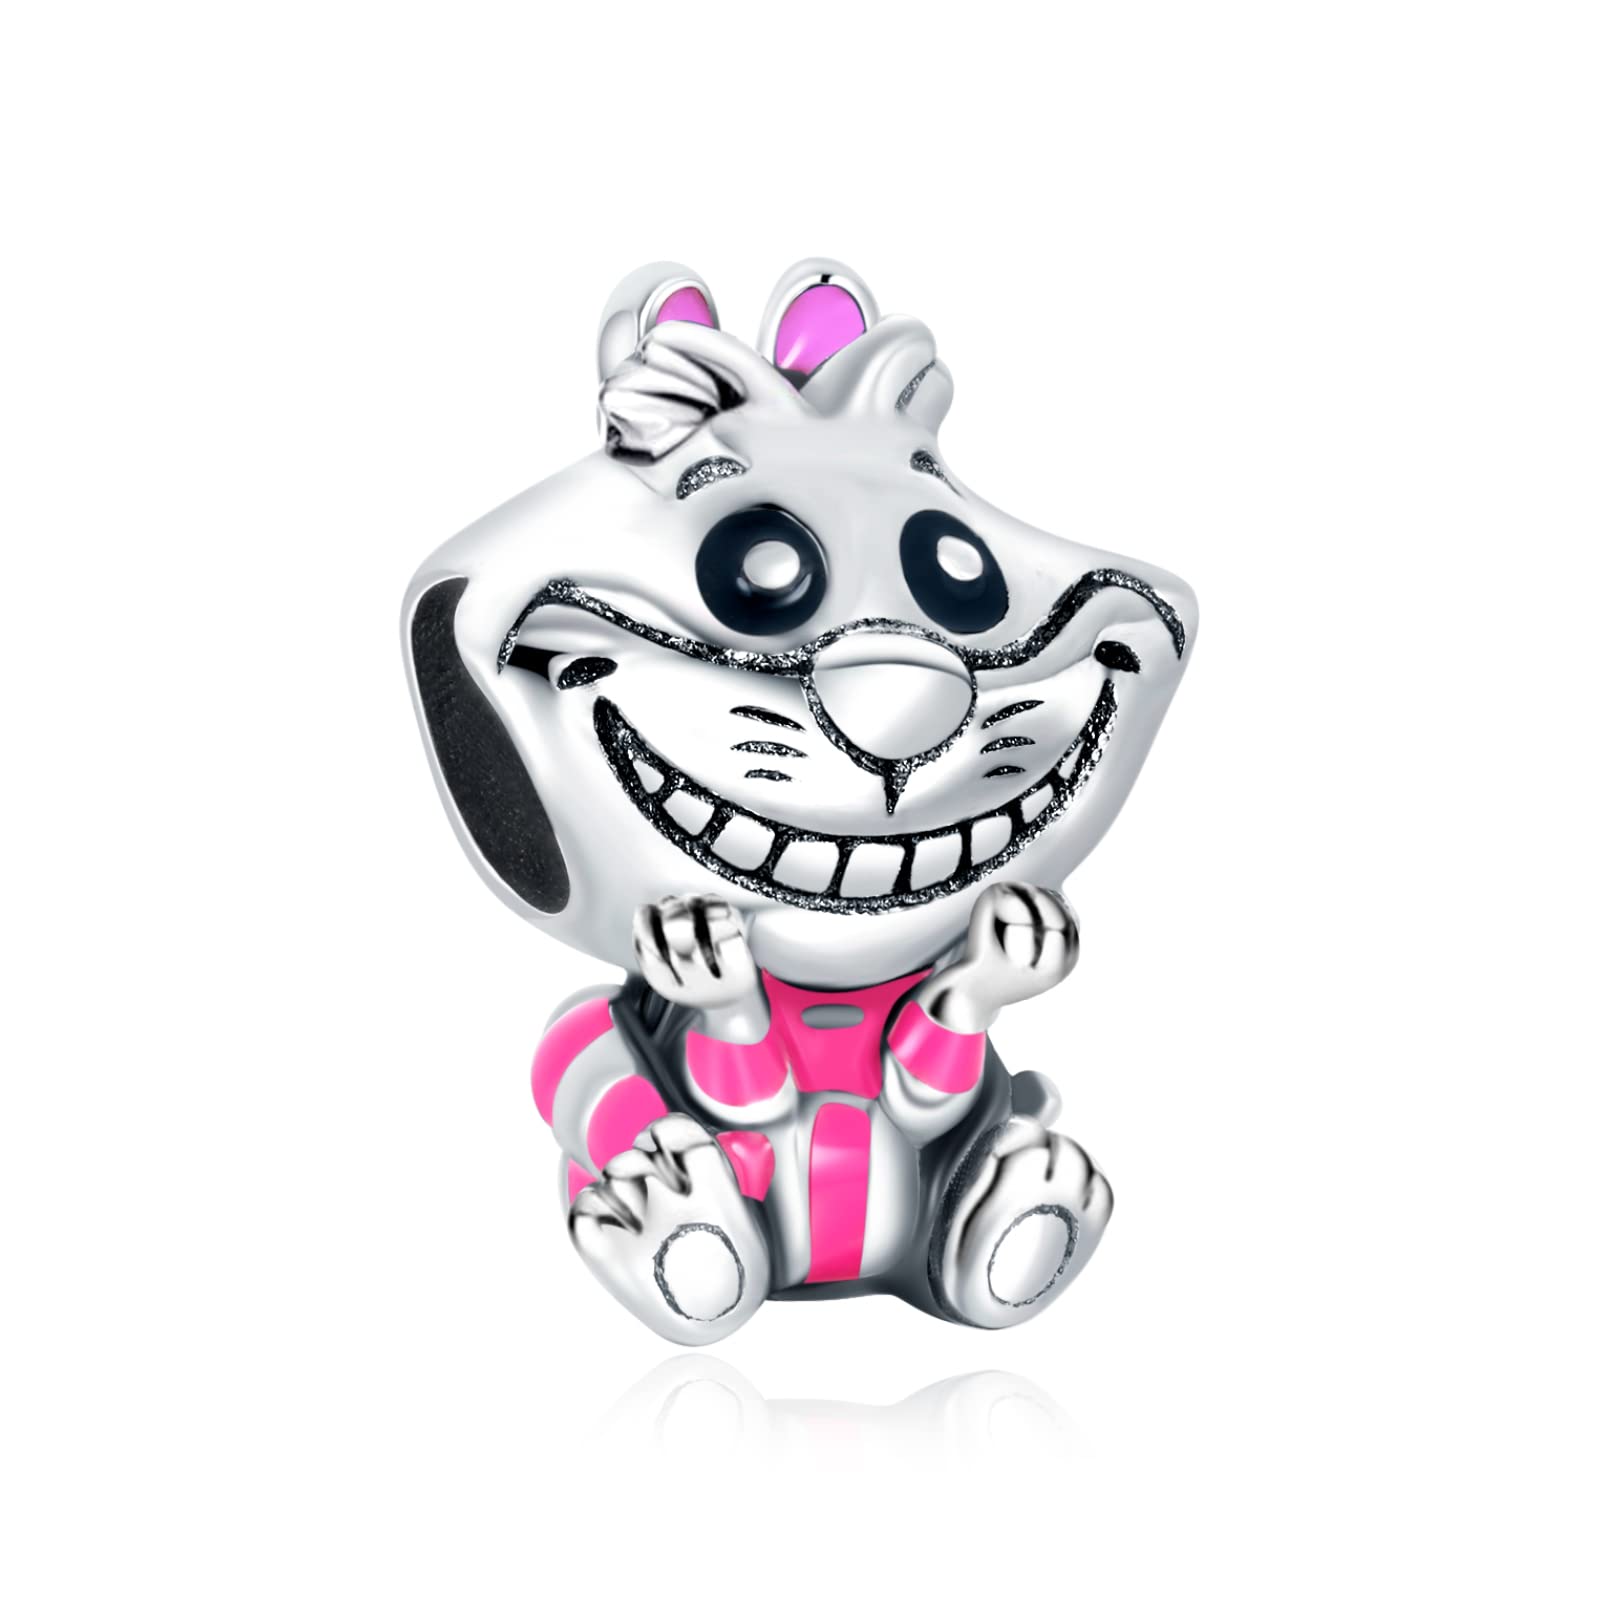 EZ Tuxedo Cartoon Charms 925 Sterling Silver The Art of Animation Jewelry  Collection for Bracelets